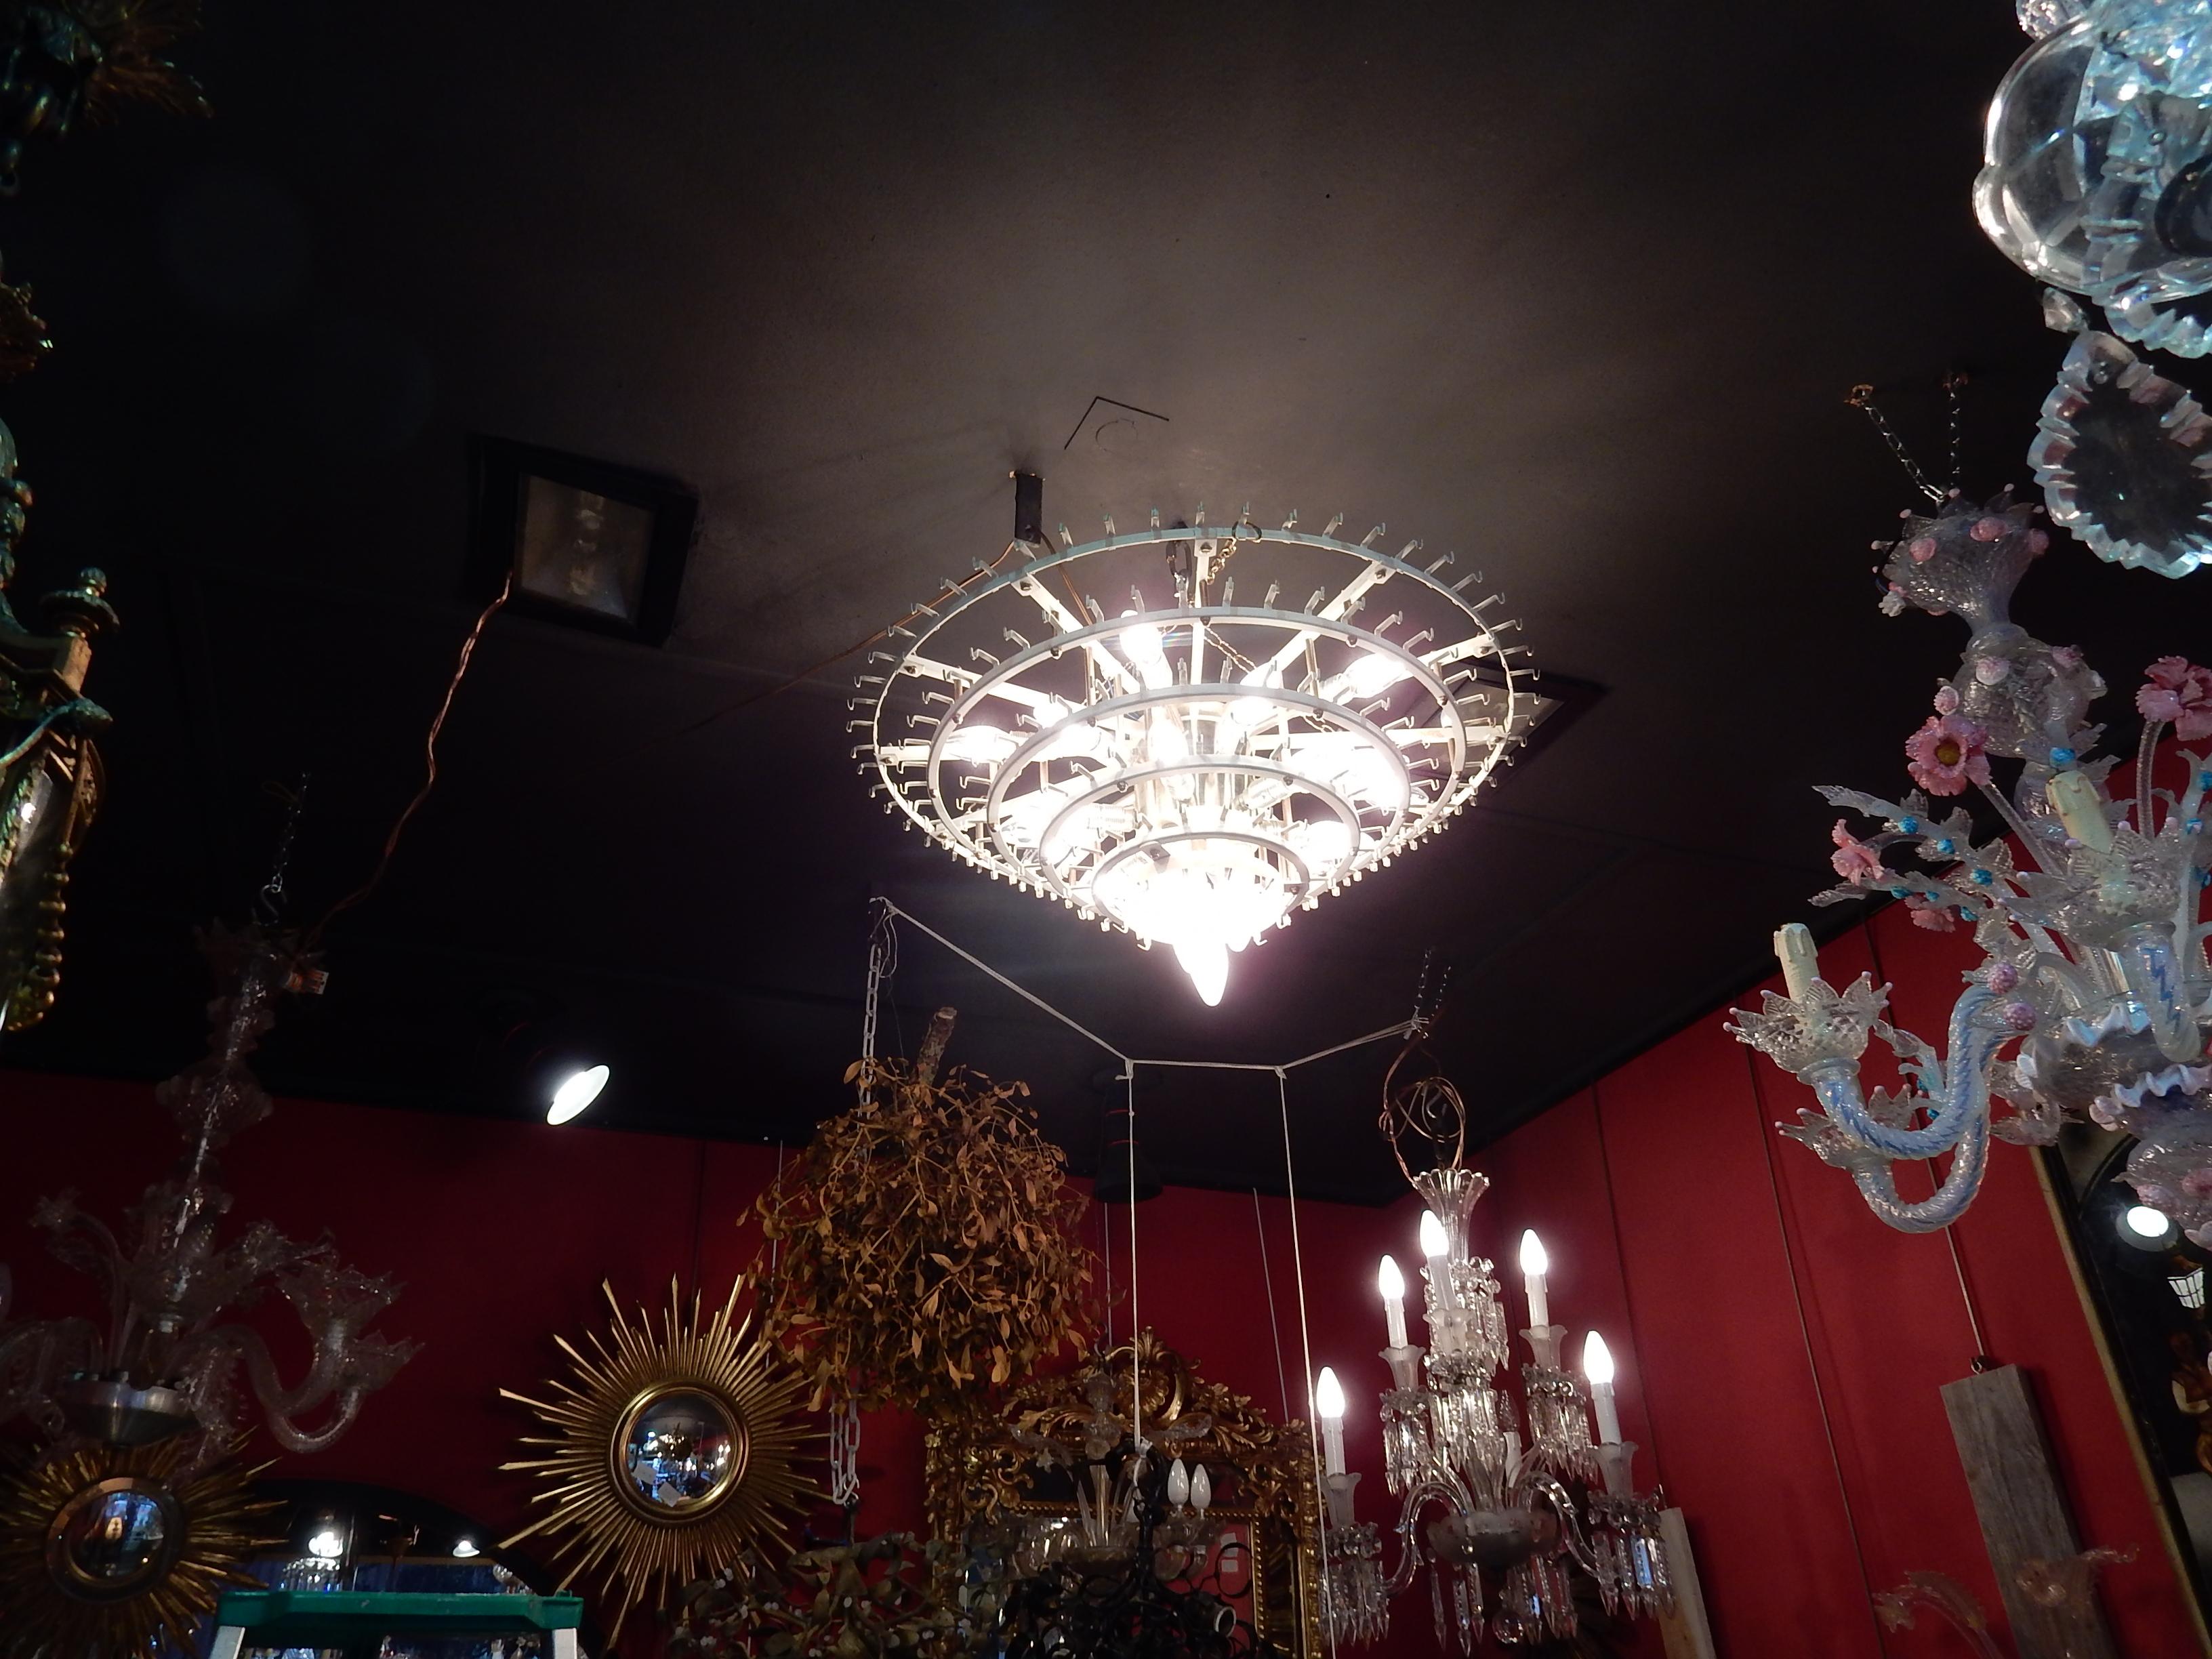 Forged 1960-1970 Pair of Venini Murano Doria Lechten Chandeliers 6 Levels 194 Crystal For Sale